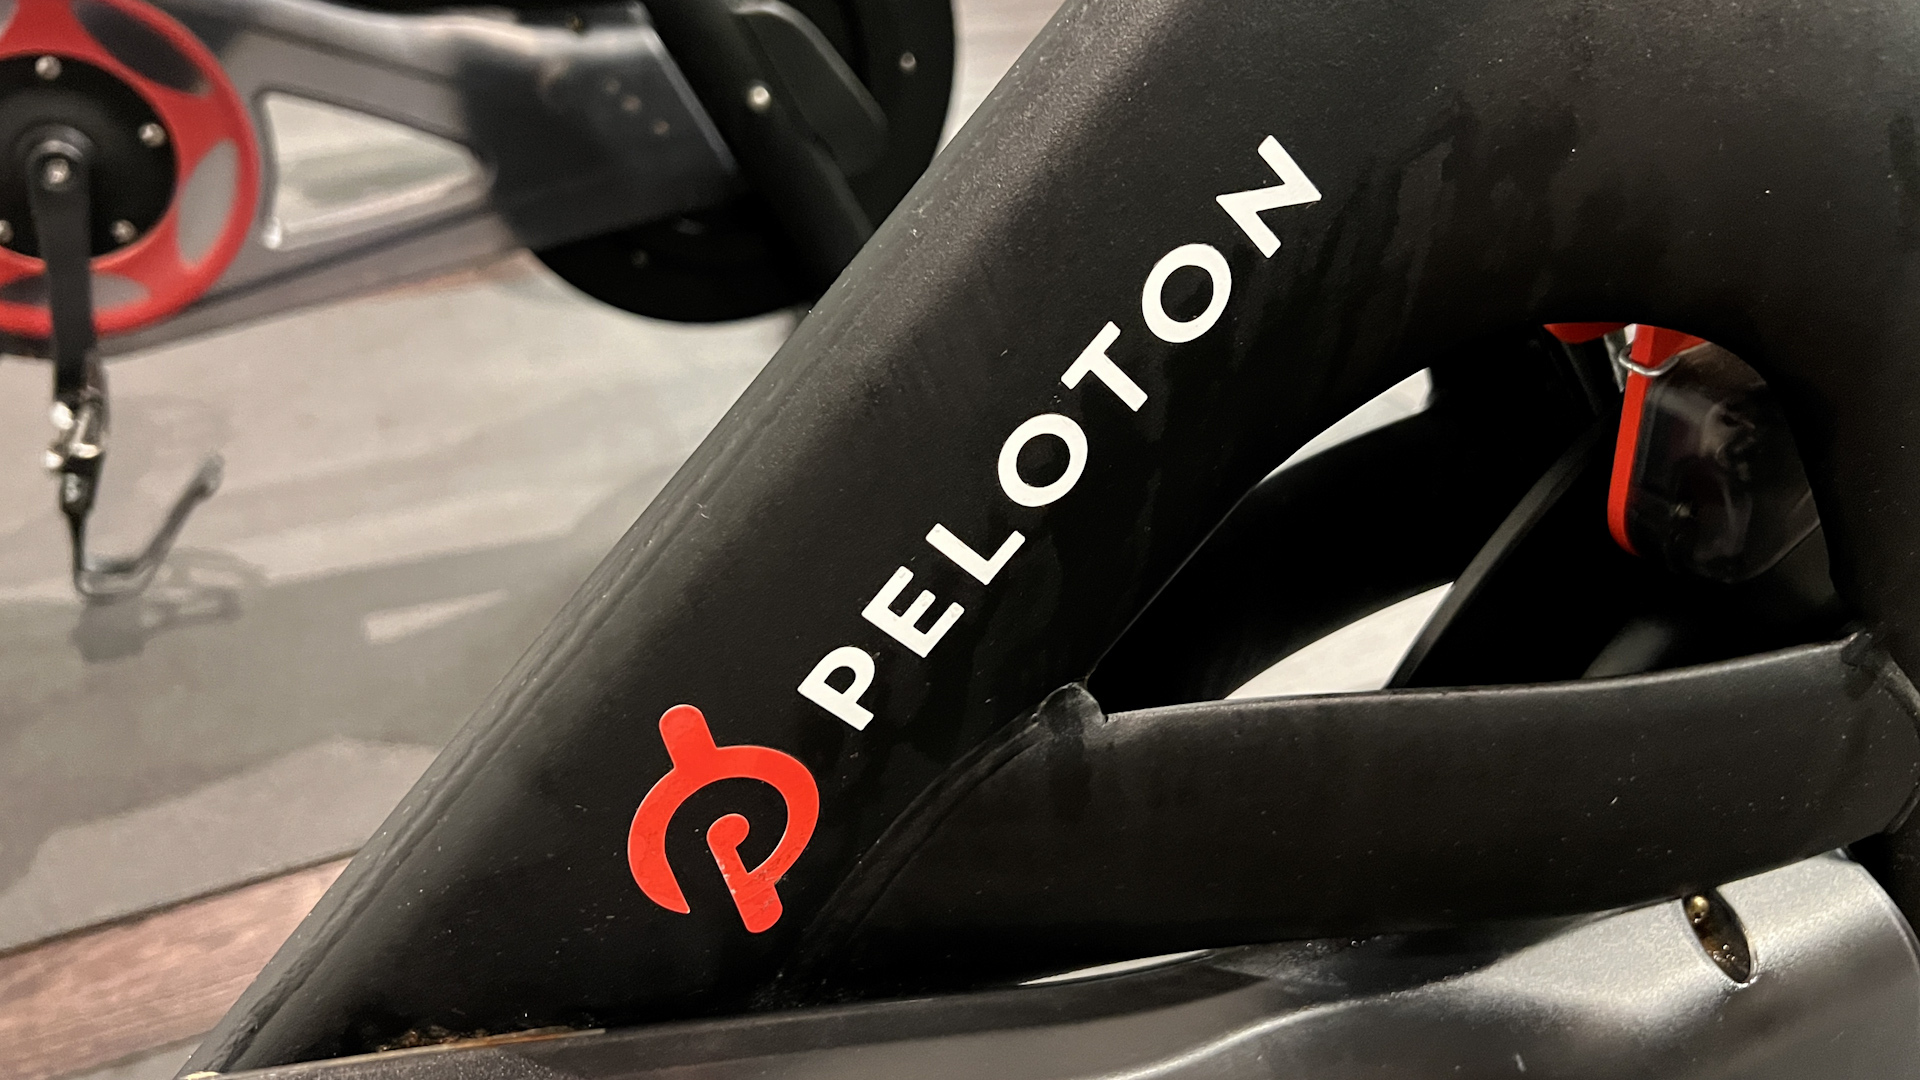 Peloton has announced that its CEO Barry McCarthy is stepping down amid plans to reduce its workforce by 15%, which equates to about 400 jobs. This development marks the fifth round of layoffs since 2021 for the fitness company.